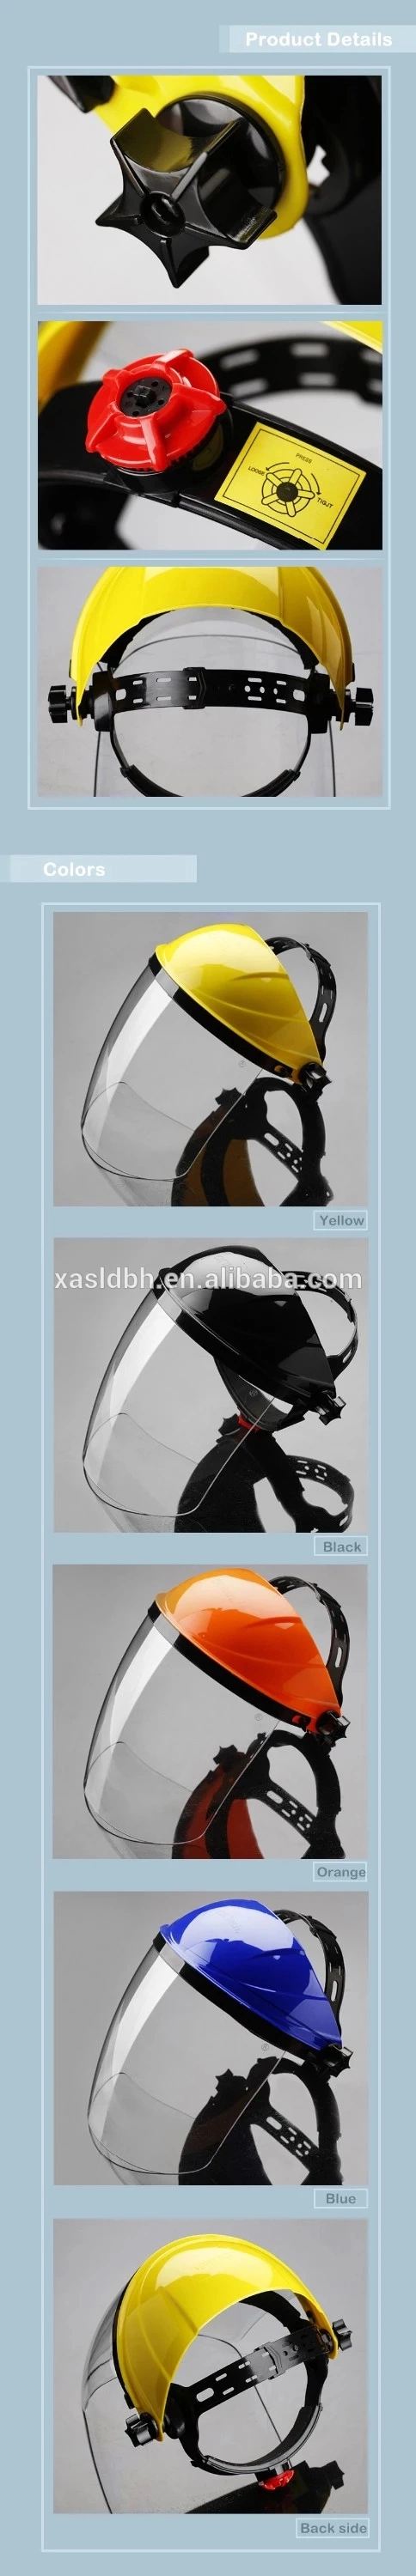 Bicycle Helmet Safety PC Full Face Transparent Visor Face Shield